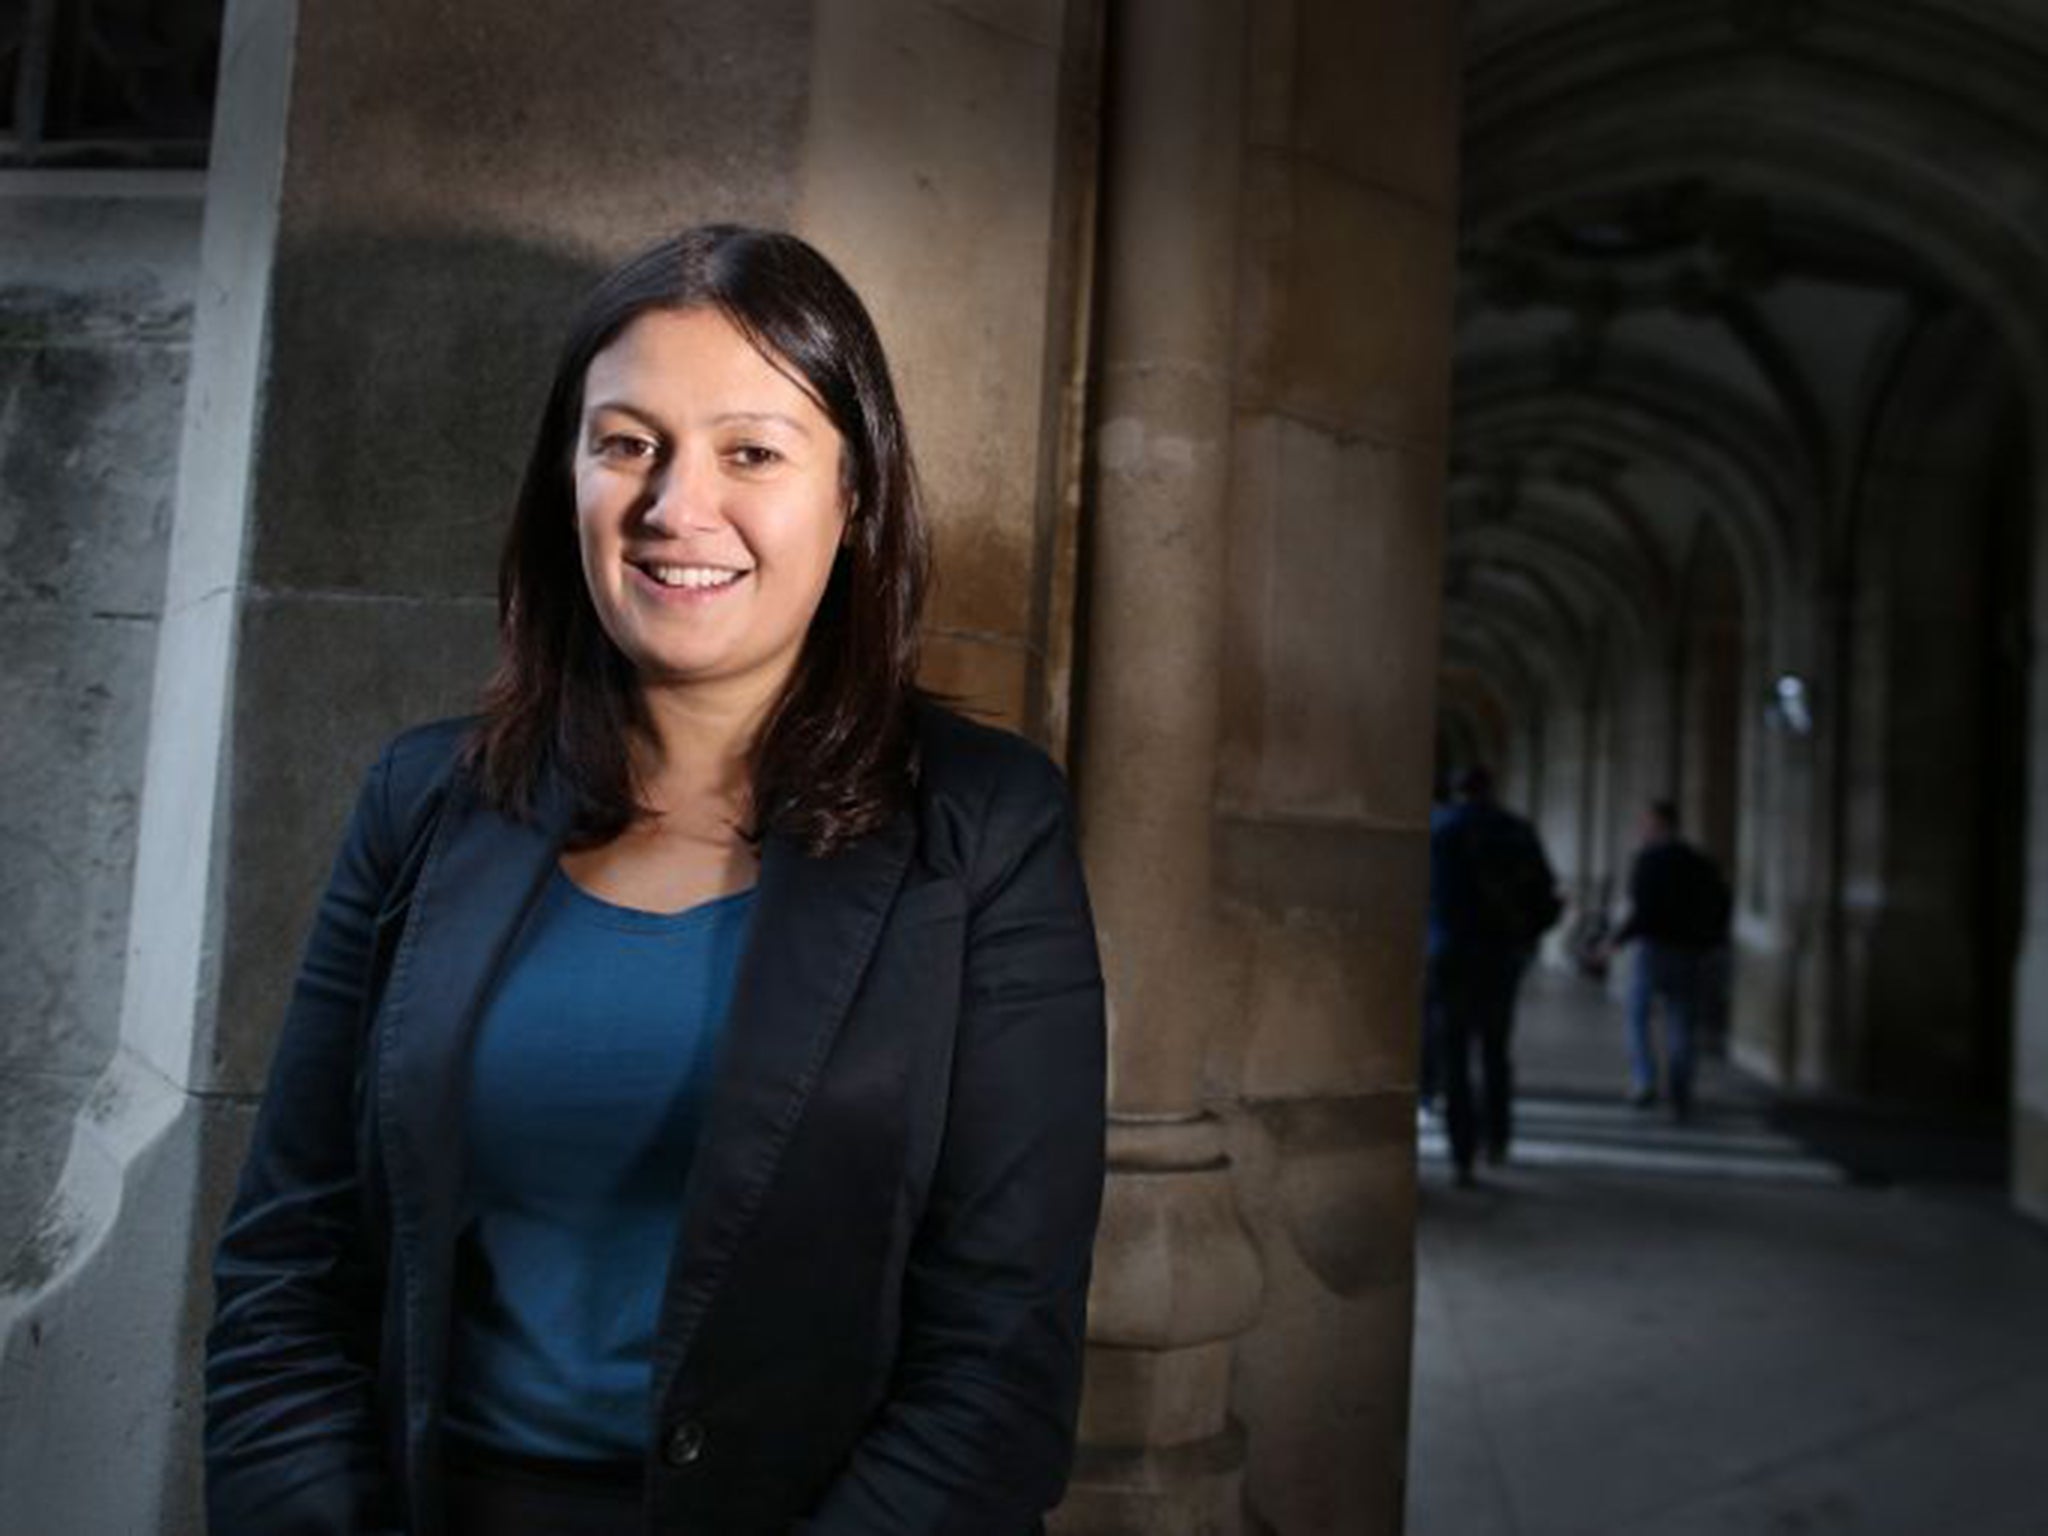 Lisa Nandy says there is a false dichotomy in Tory thinking on climate change